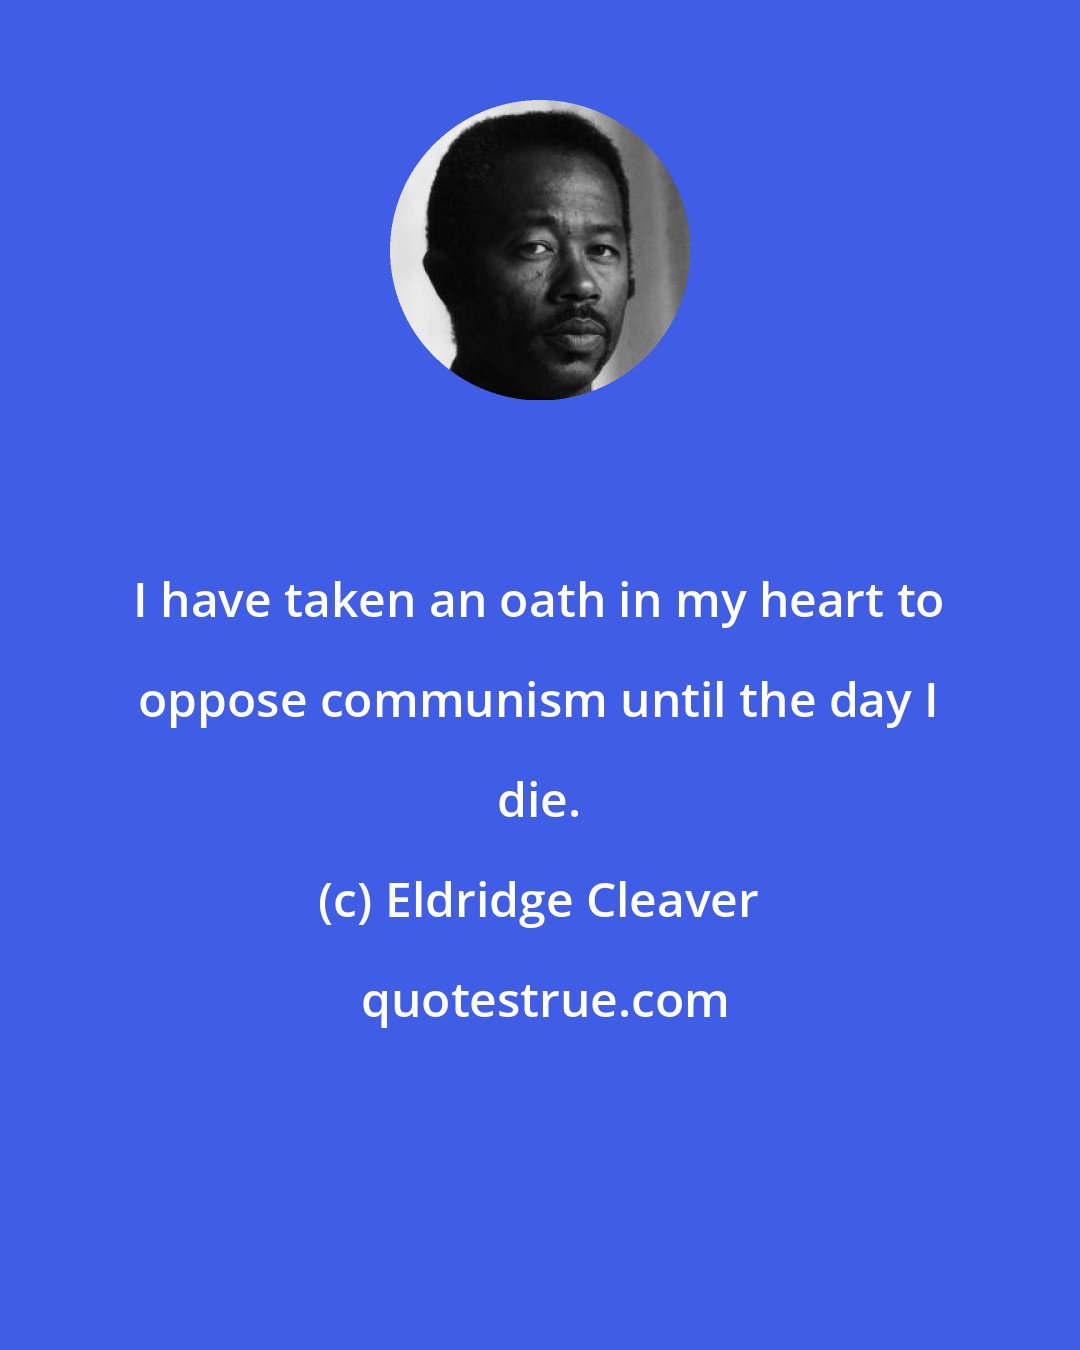 Eldridge Cleaver: I have taken an oath in my heart to oppose communism until the day I die.